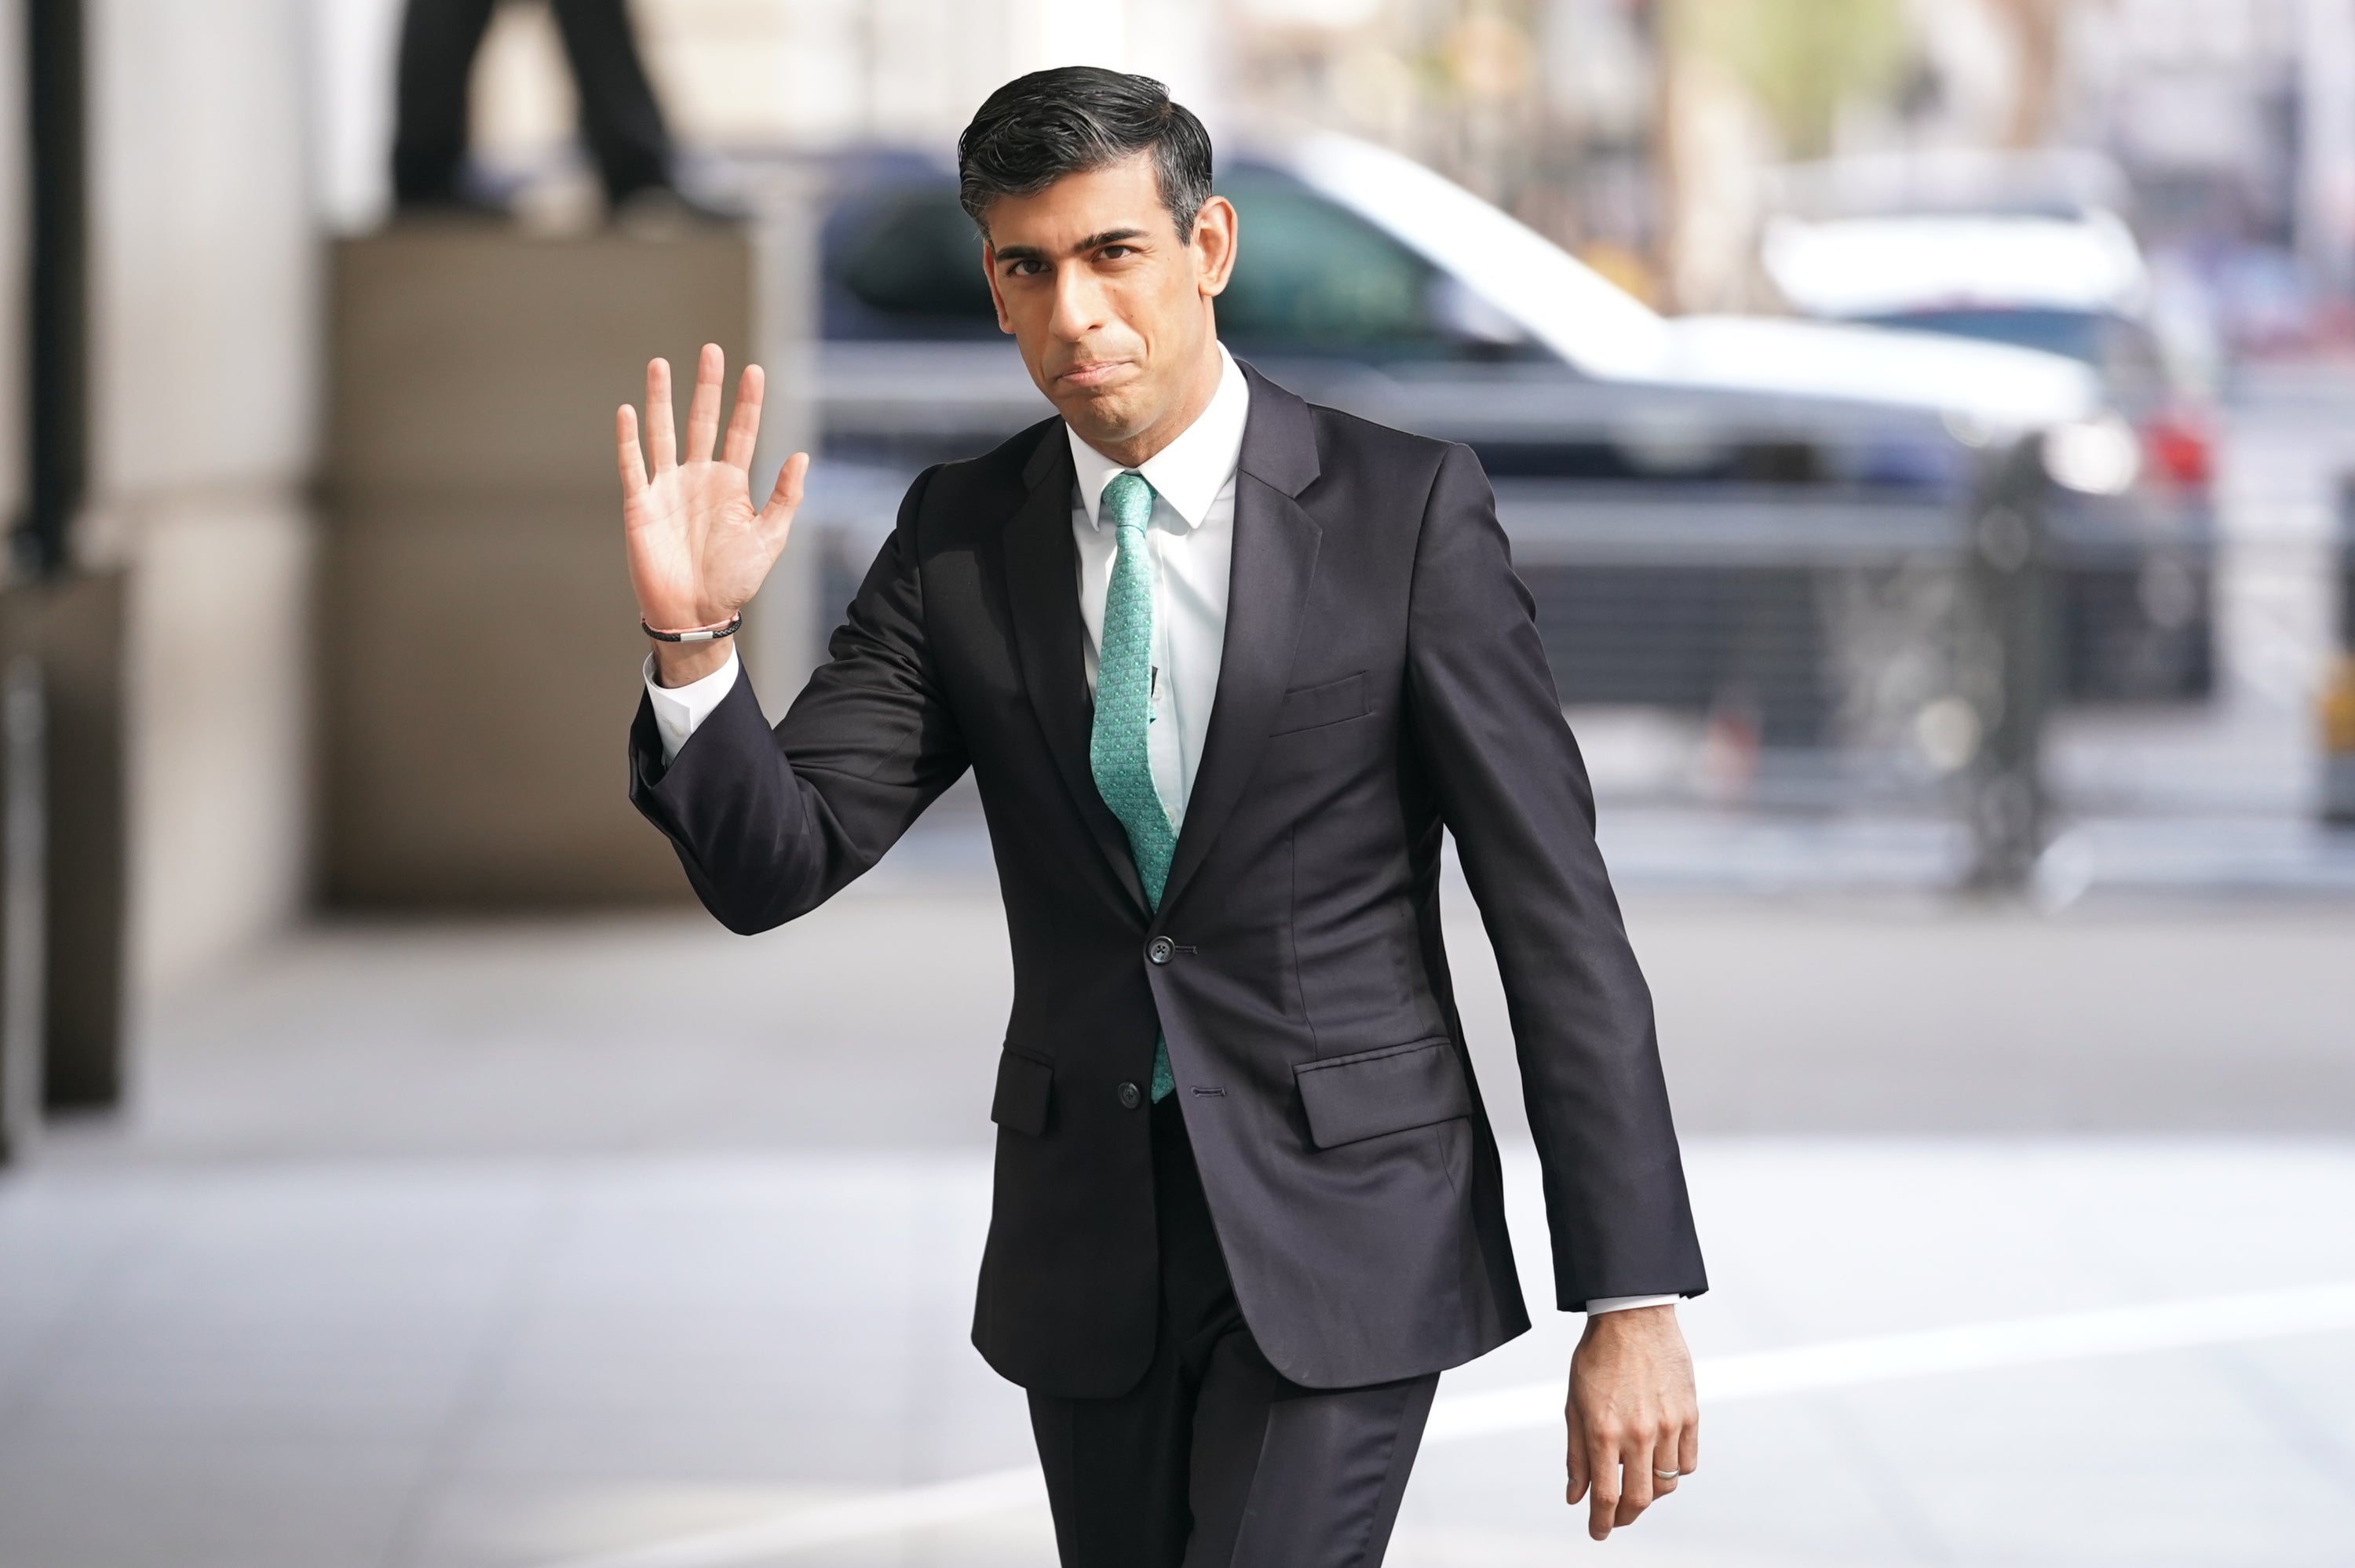 Chancellor Rishi Sunak is under pressure over rising fuel prices (Kirsty O’Connor/PA)